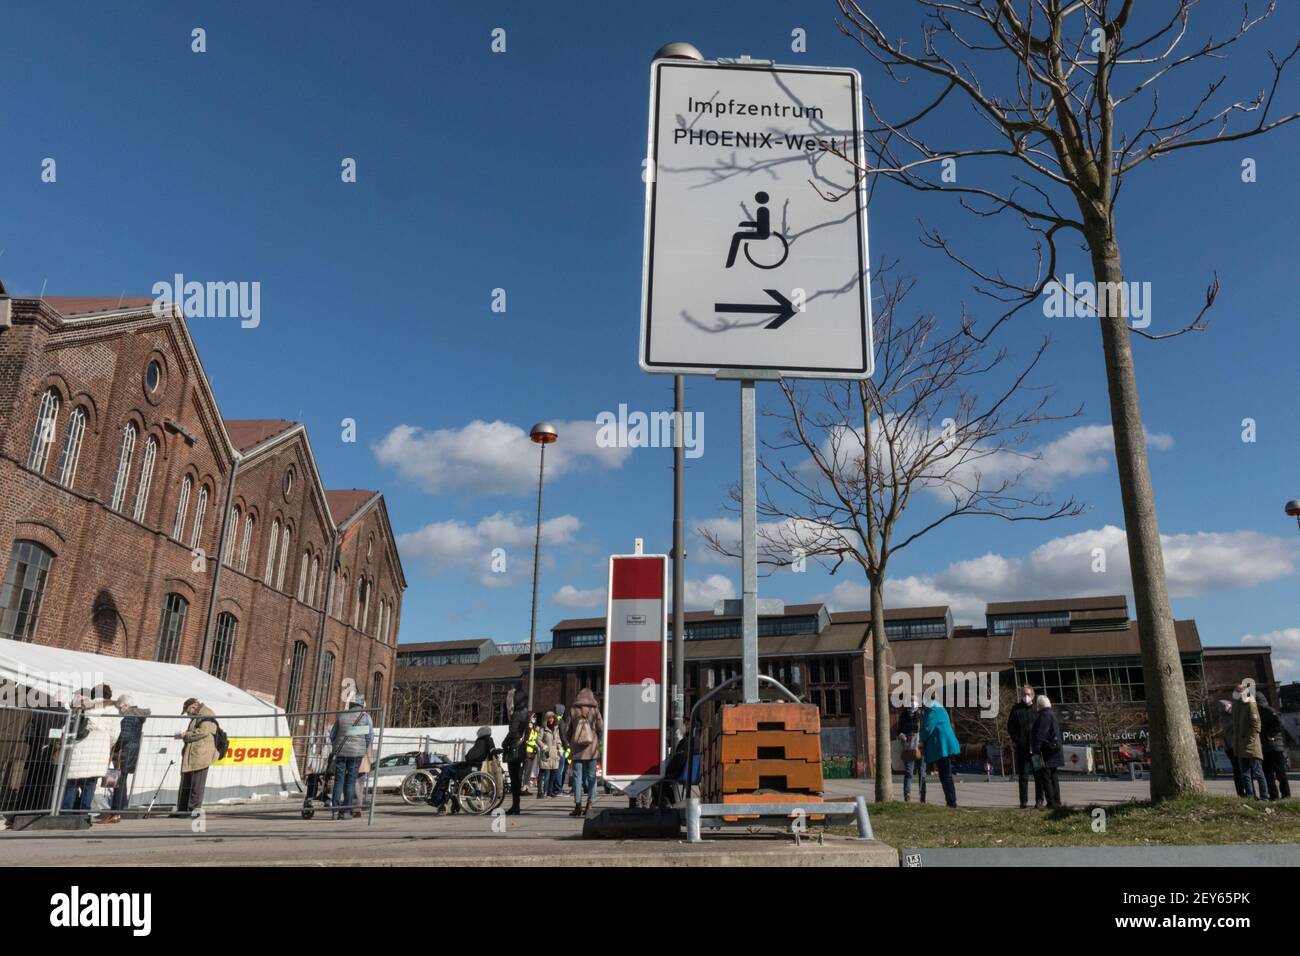 Dortmund, NRW, Germany, 05th Mar 2021. An orderly queue of people with appointments has formed outside the centre. Signage and directions to Impfzentrum Phoenix-West. Phoenix West, a former blast furnace and industrial site now housing culture and music venues is currently Dortmund's largest and busiest vaccination centre. The vaccination campaign in Germany is picking up momentum. Earlier this week, The German health ministry and vaccination commission STIKO cleared Astra Zeneca's vaccine for use in the over 65 age group. In addition, GP practices can start administering vaccinations soon. A Stock Photo